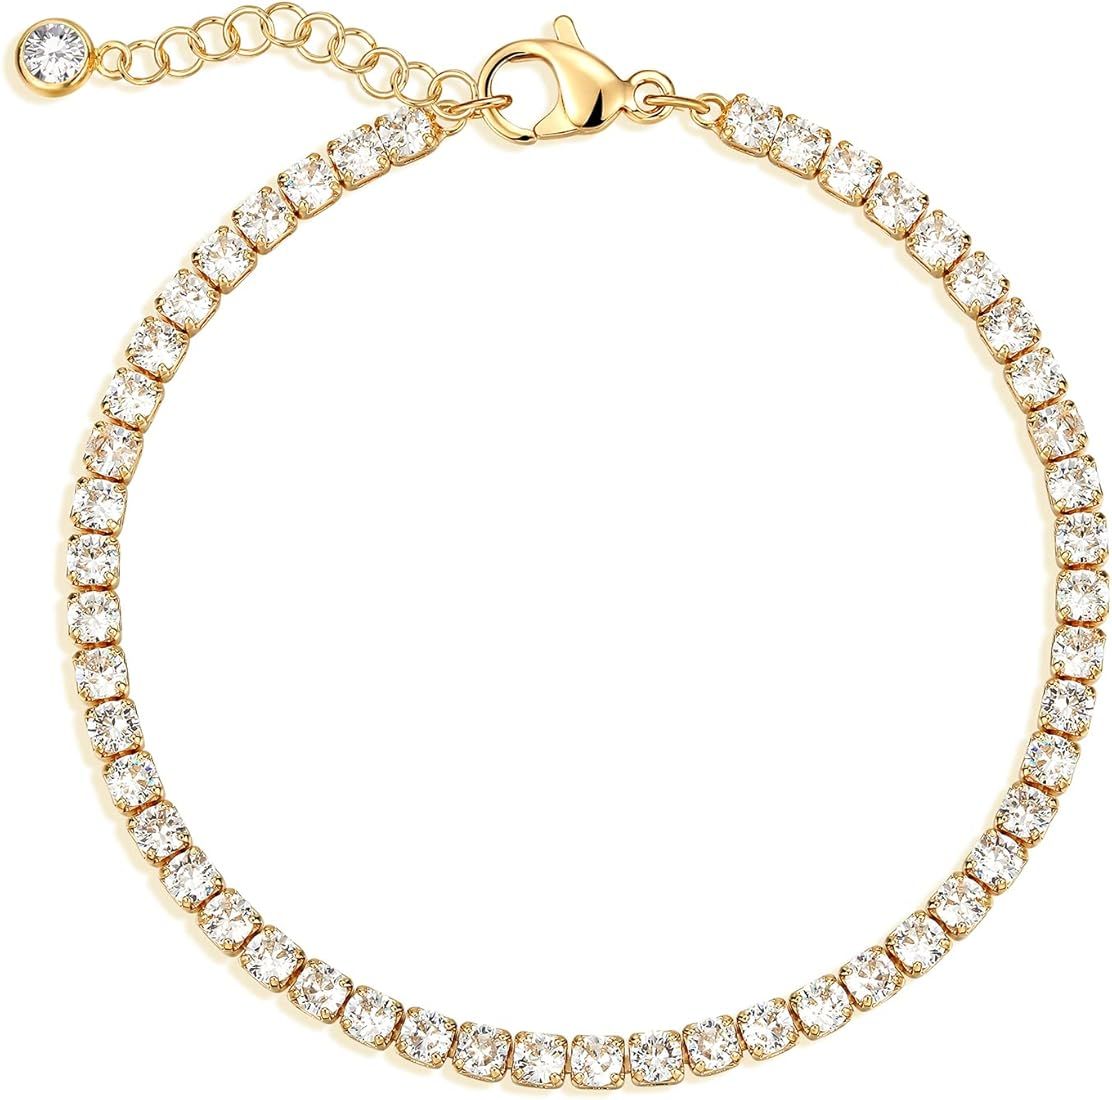 MEVECCO Gold Tiny Pearl Bracelet,14K Gold Plated Cute Beaded Freshwater Cultured Pearls Tiny Charm D | Amazon (US)